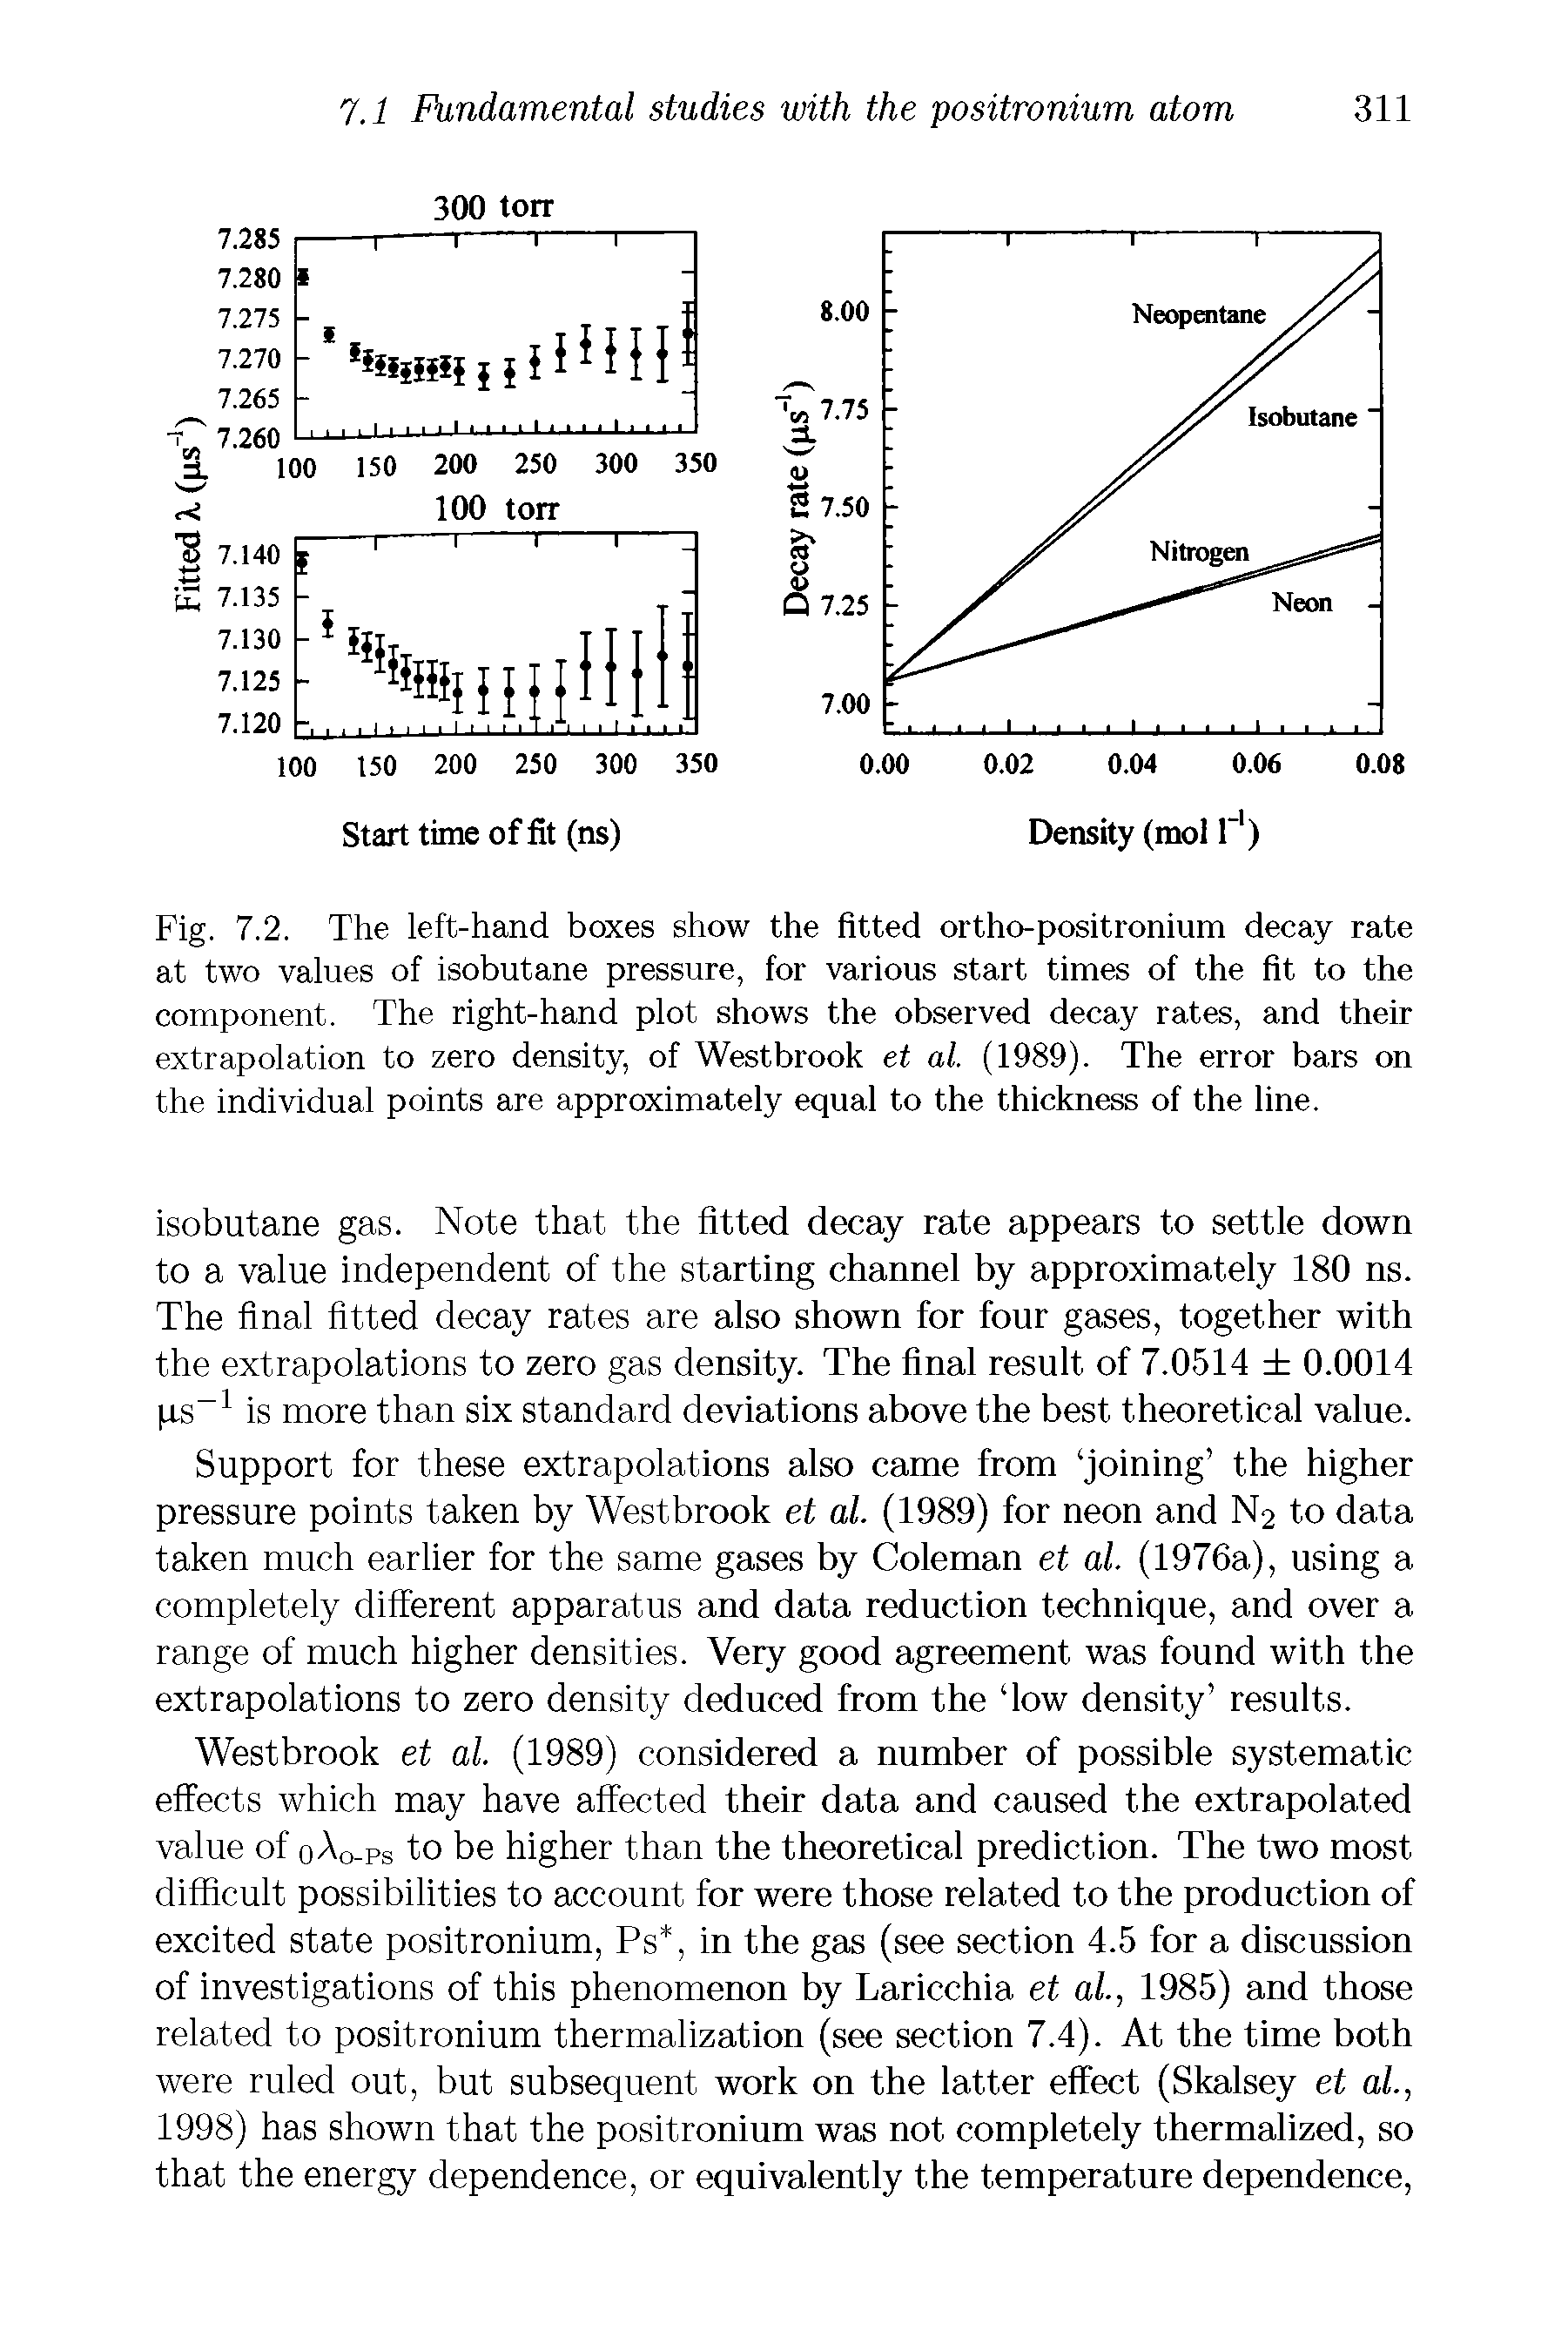 Fig. 7.2. The left-hand boxes show the fitted ortho-positronium decay rate at two values of isobutane pressure, for various start times of the fit to the component. The right-hand plot shows the observed decay rates, and their extrapolation to zero density, of Westbrook et al. (1989). The error bars on the individual points are approximately equal to the thickness of the line.